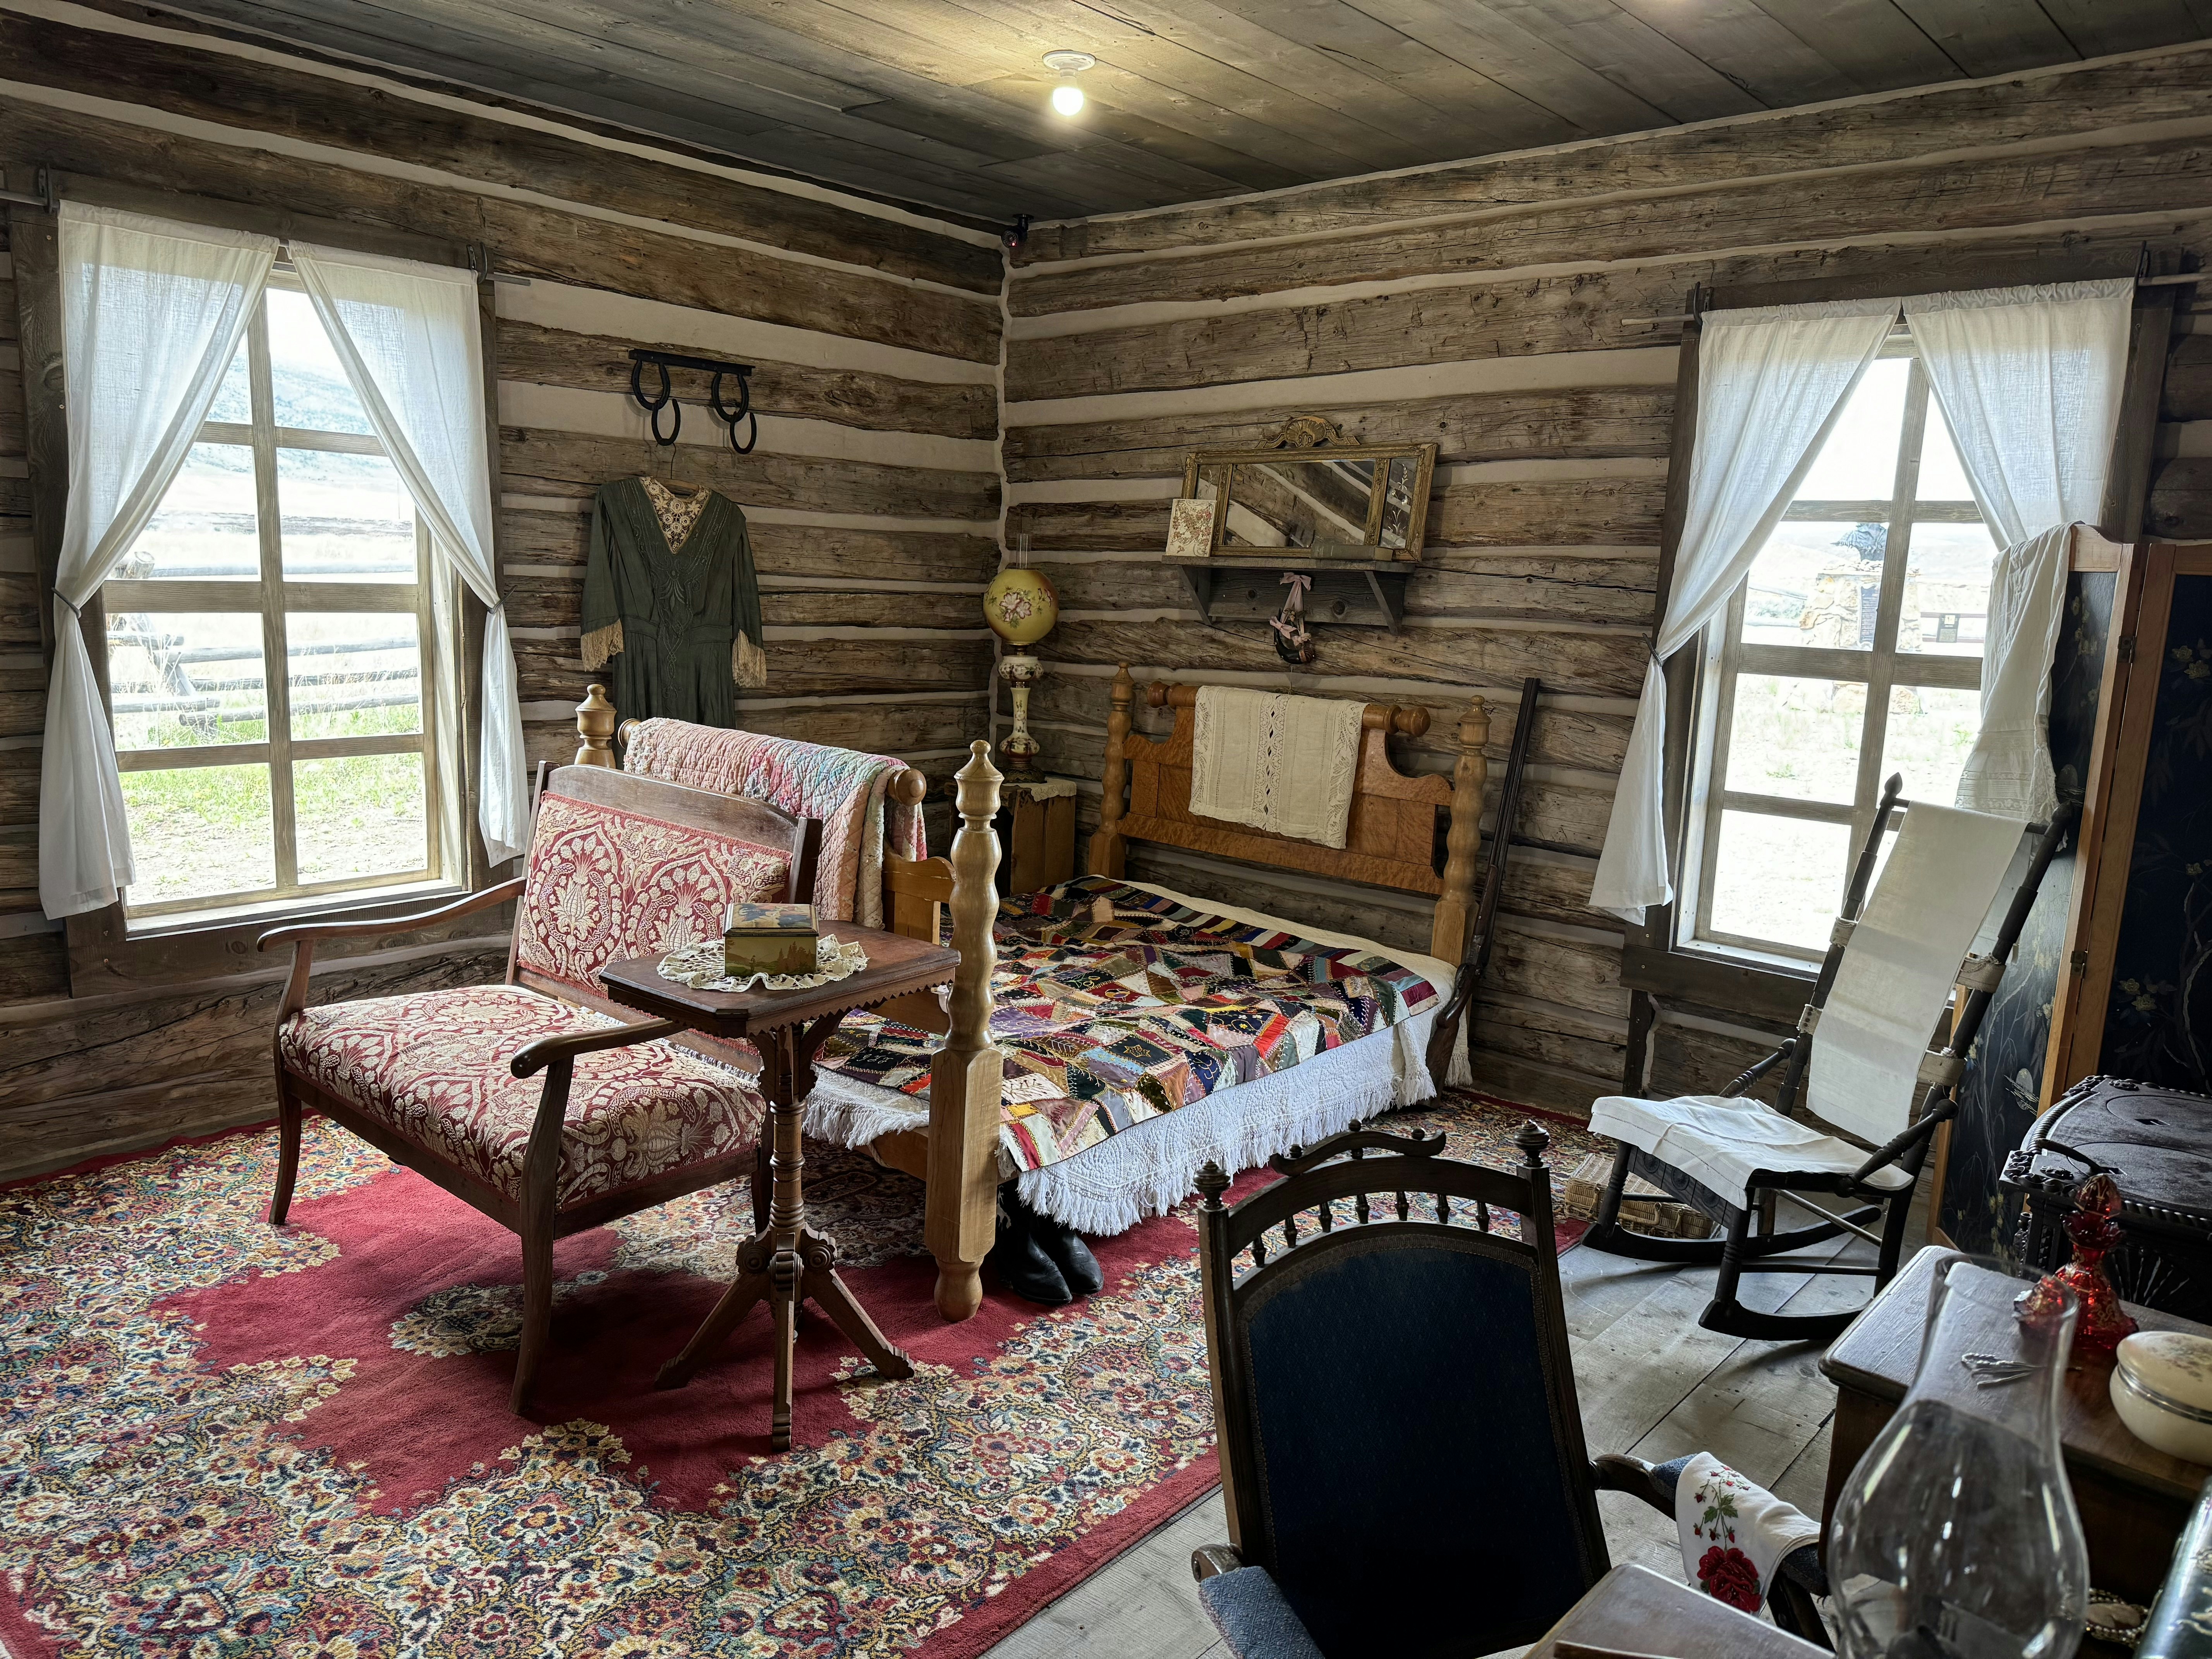 Rose Williams' personal bedroom at her roadhouse and brothel. All the furnishings are authentic to the 1890s. The structure itself was rediscovered near Meeteetse in 2019 and meticulously disassembled, reassembled, and restored at Old Trail Town between 2021 and 2024.